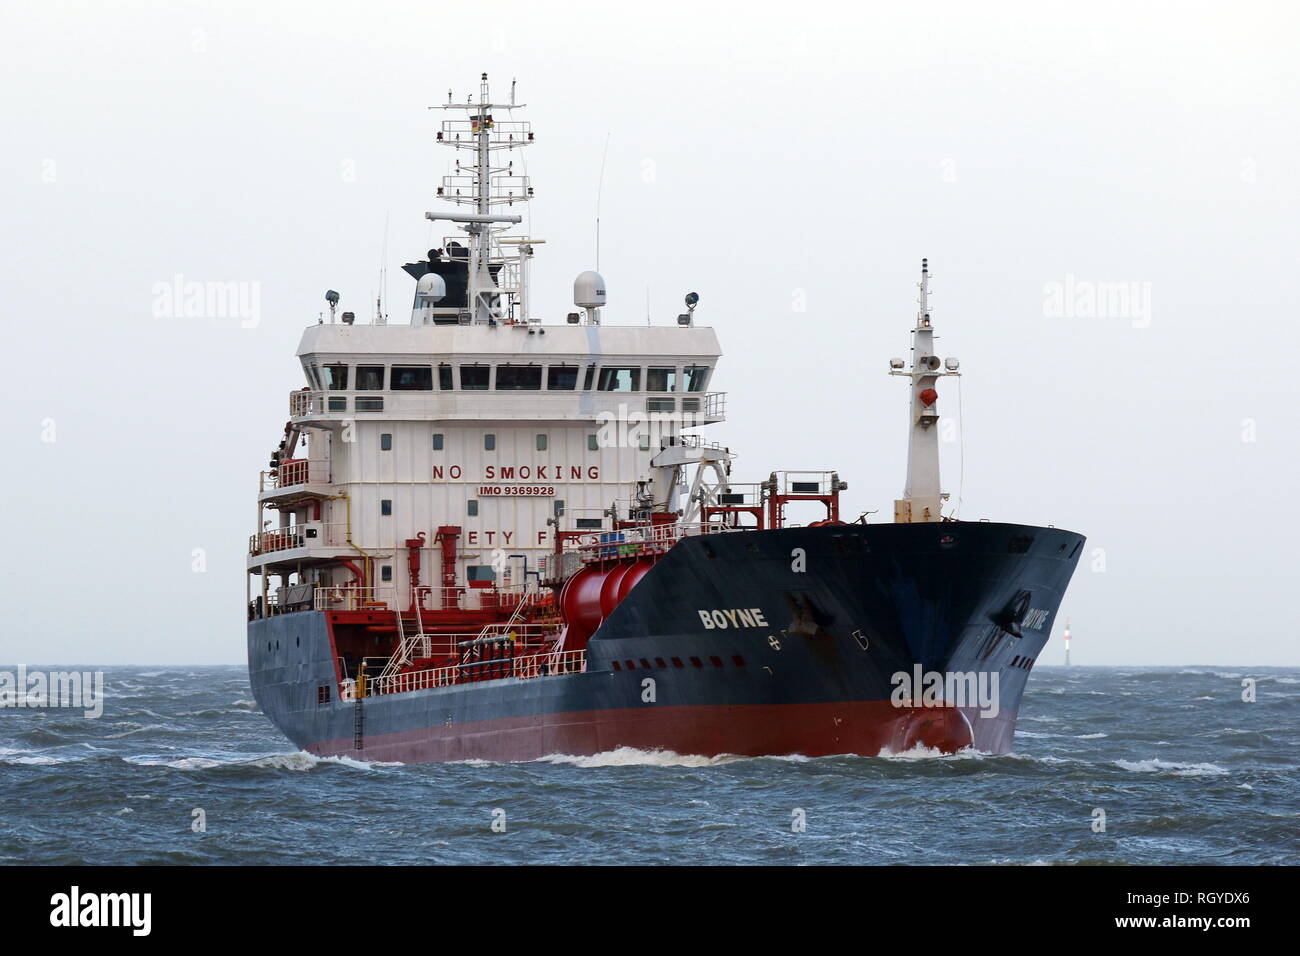 The tanker Boyne happened on 1 January 2019 Cuxhaven and continues to Hamburg. Stock Photo